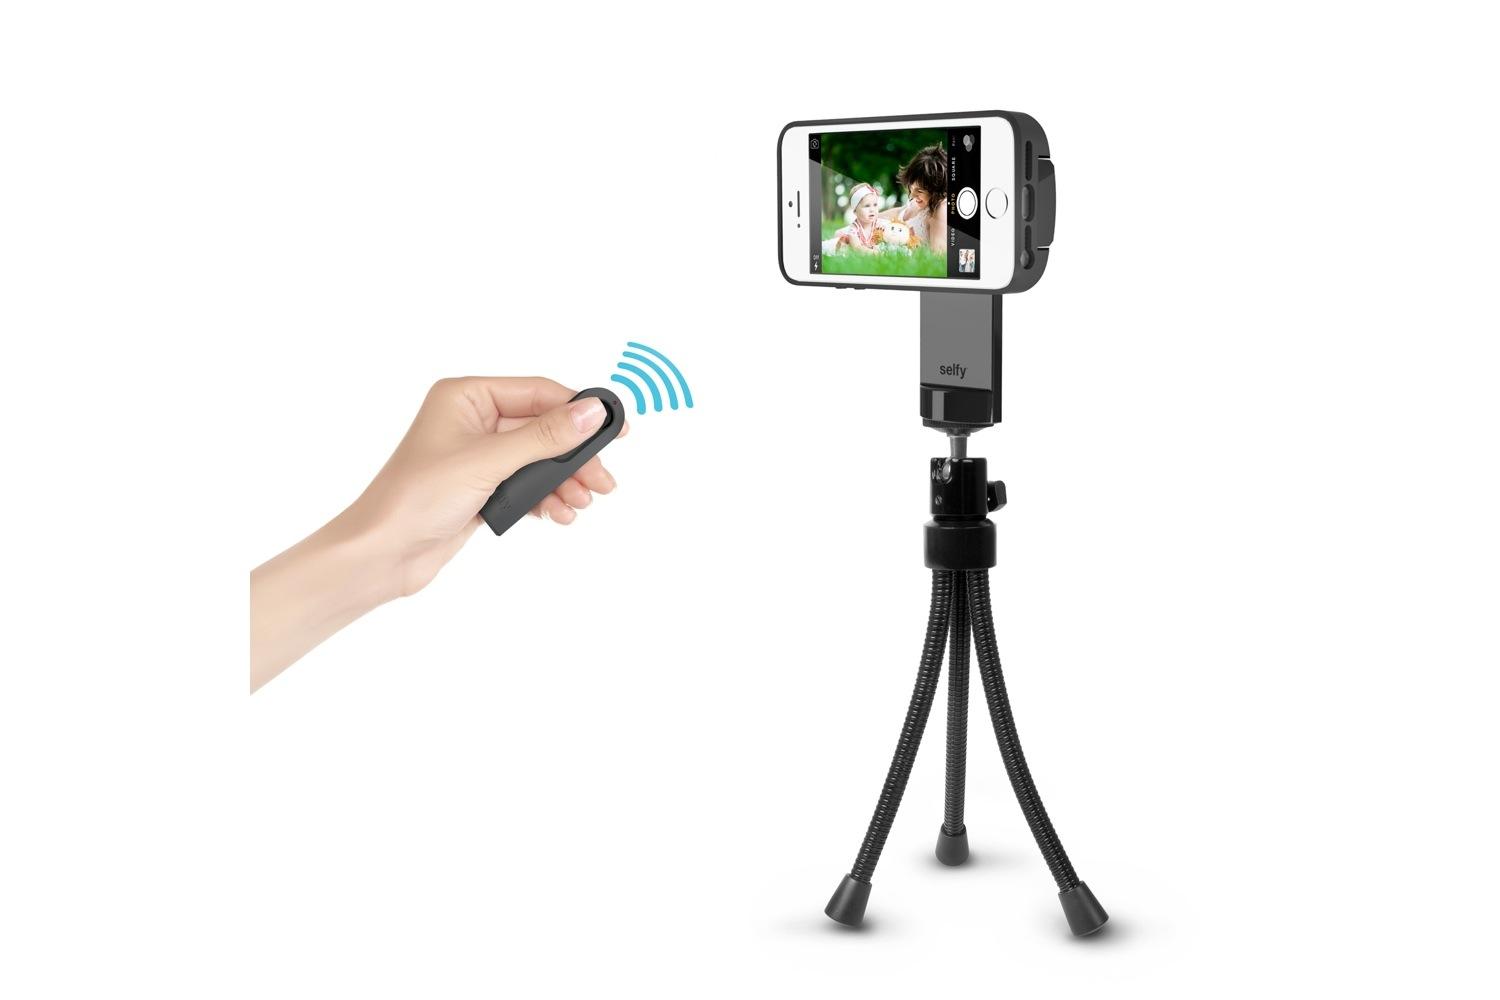 iluv smartphone case with built in remote shutter designed for the selfie obsessed selfy tripod